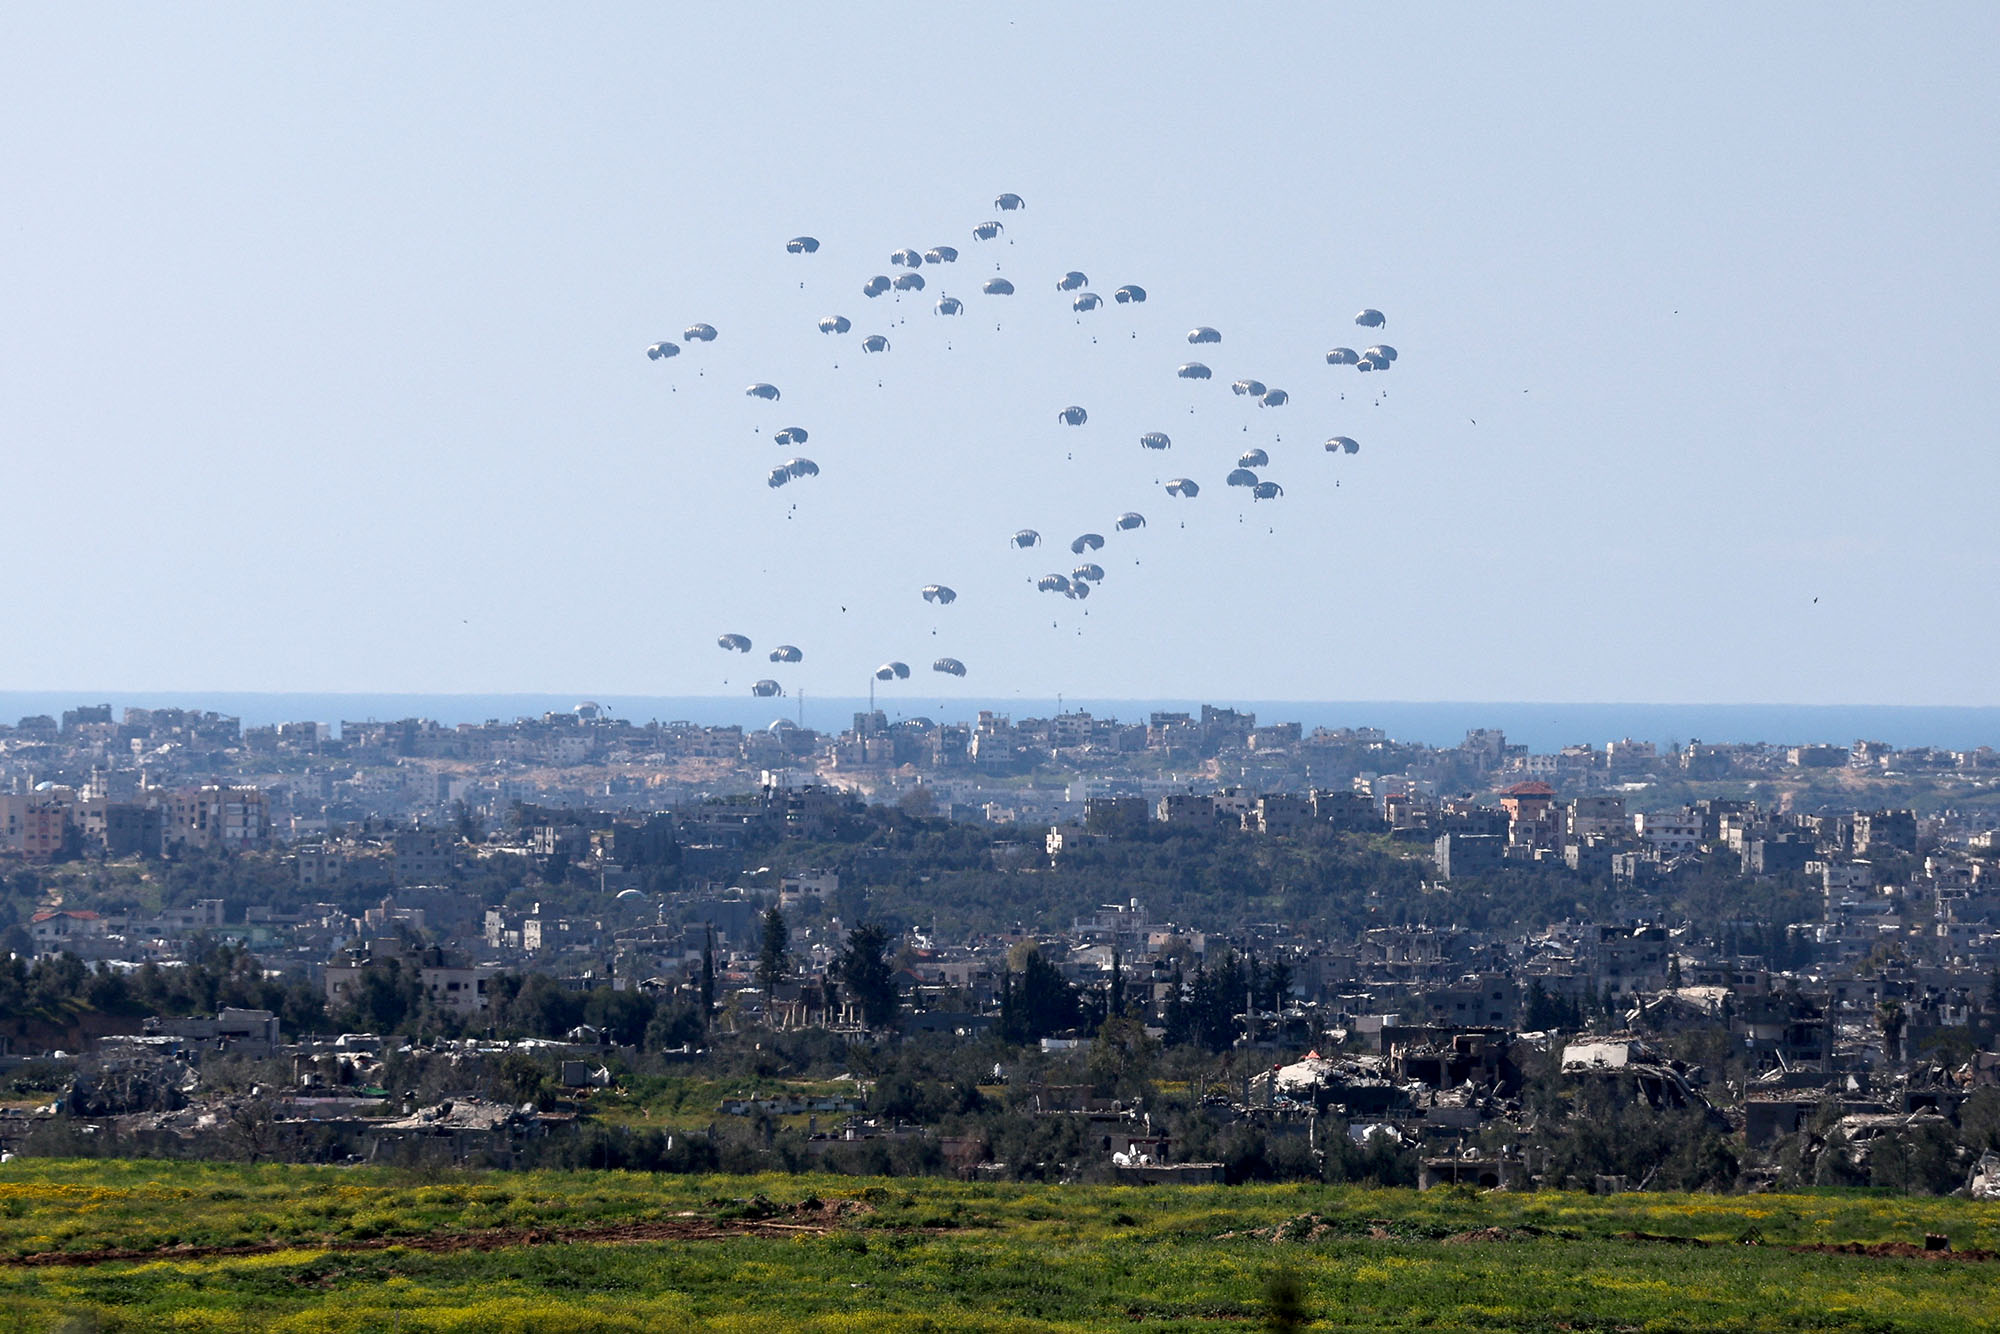 Packages fall towards northern Gaza after being dropped from a military aircraft, as seen from Israel's border with Gaza, in southern Israel, on March 11.